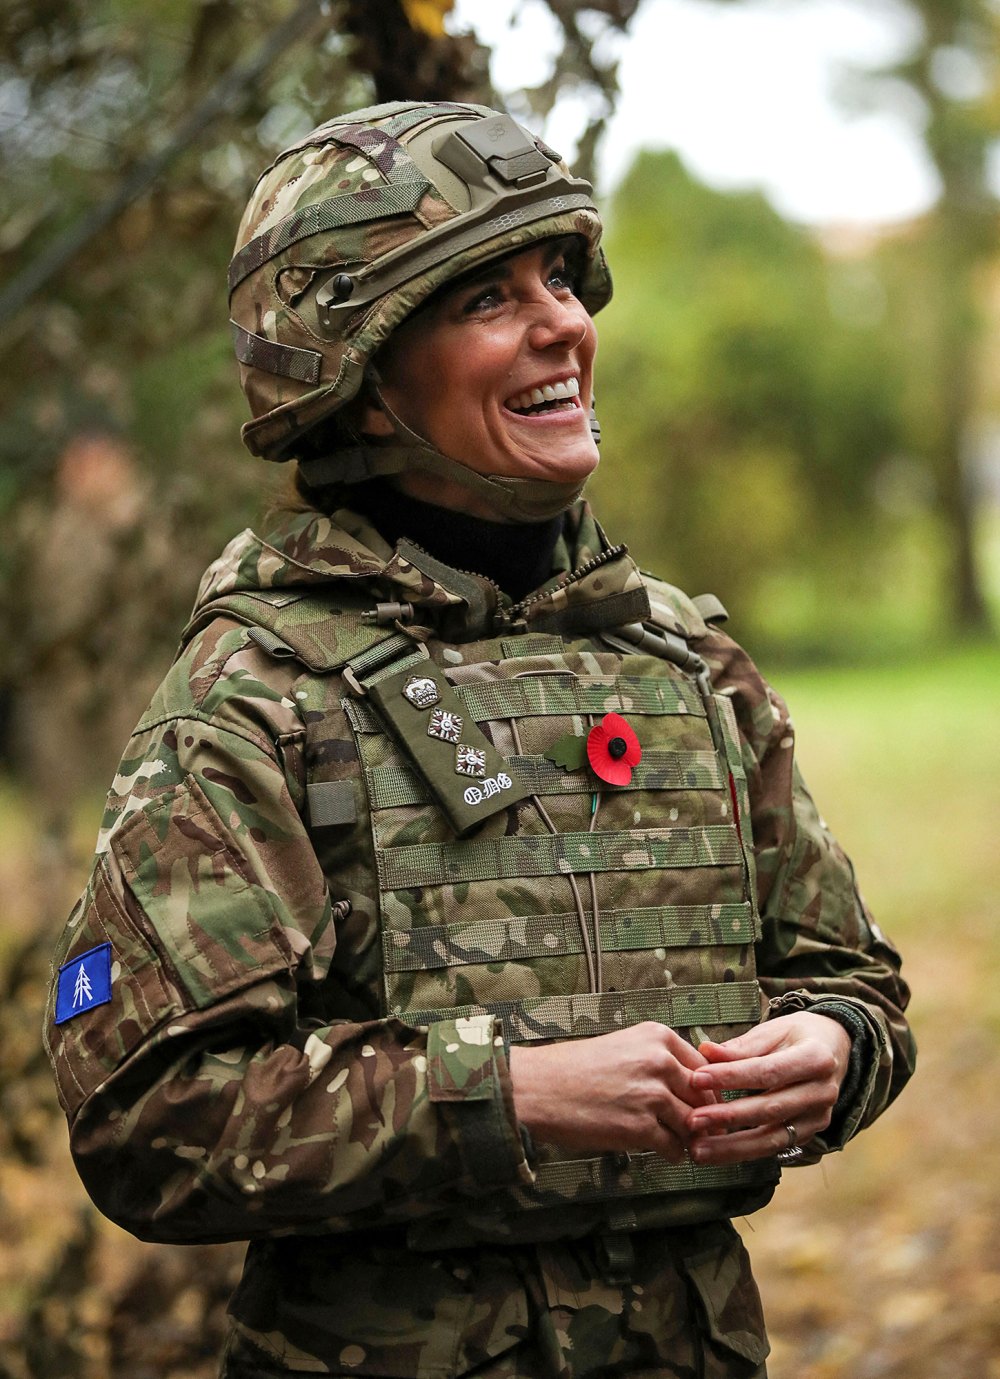 Princess Kate Middleton Trades in Her Dresses for Camo During Military Installation Visit